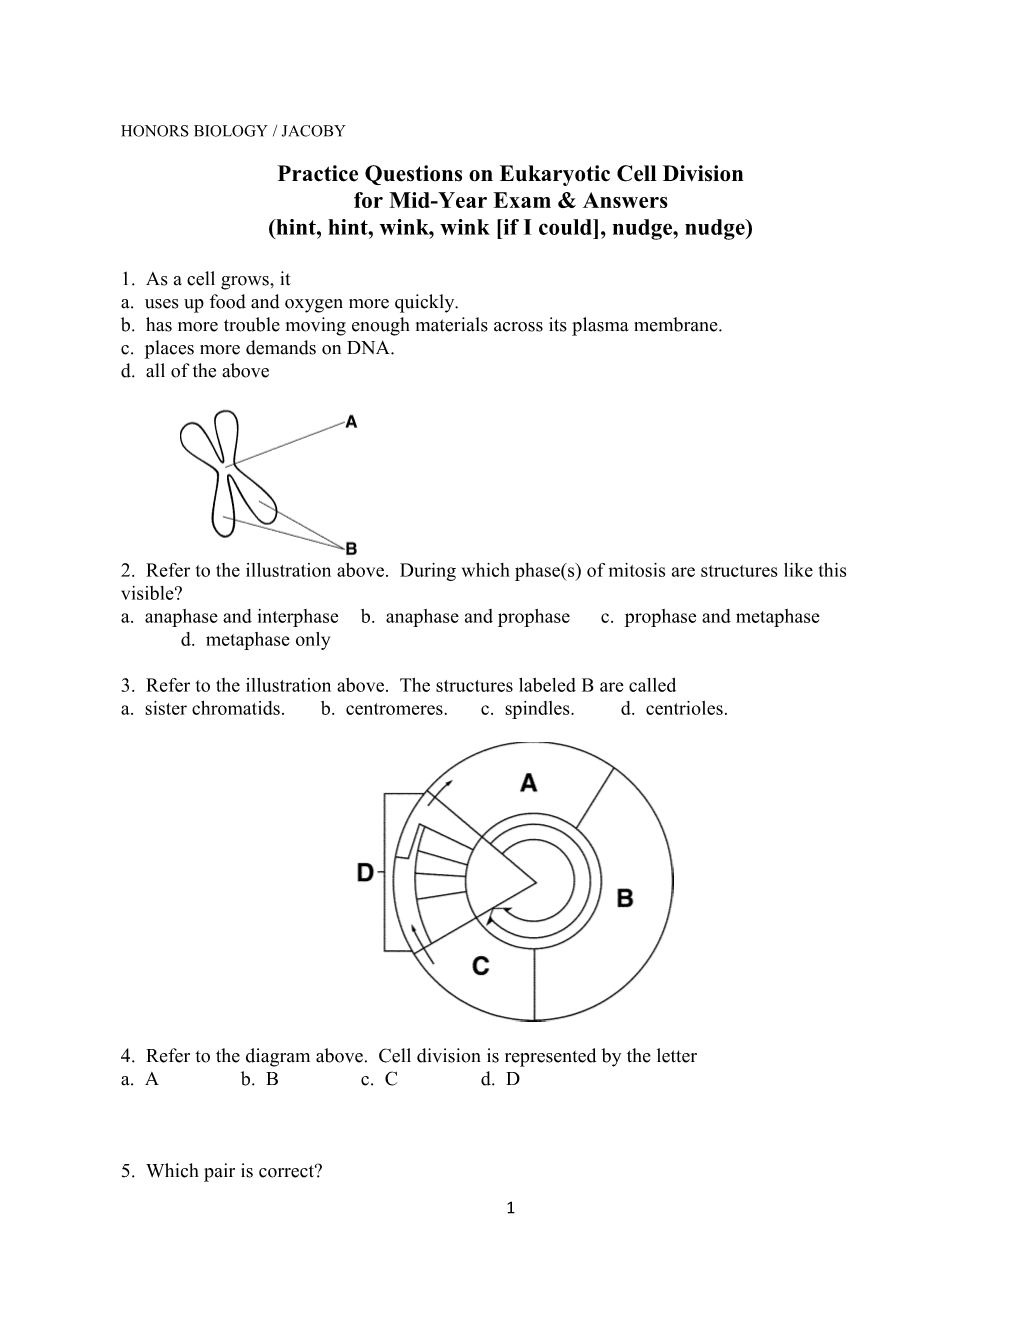 Practice Questions on Eukaryotic Cell Division